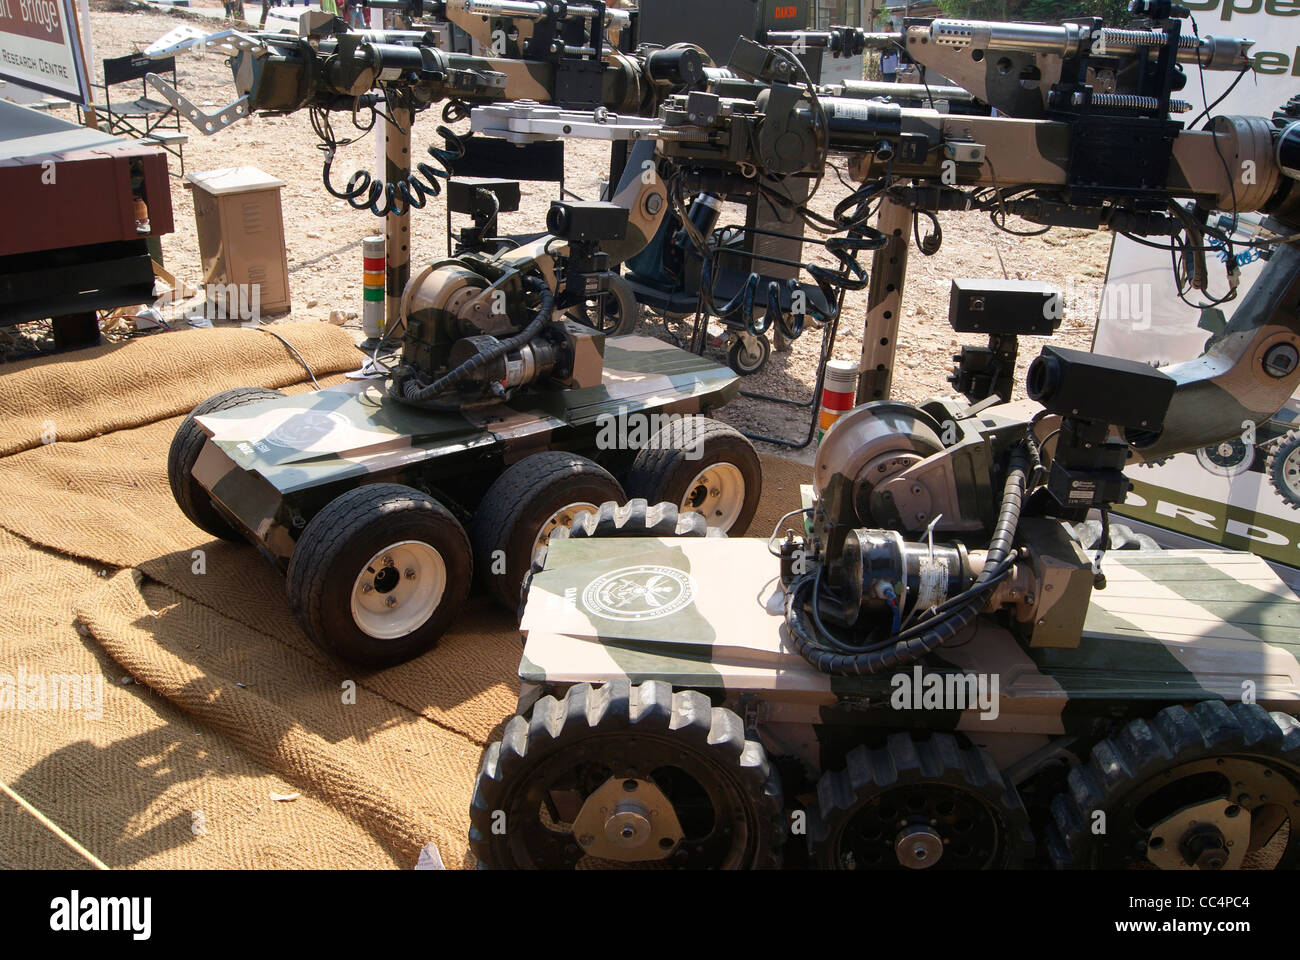 remotely-controlled-daksh-robots-of-indian-army-developed-by-defence-CC4PC4.jpg